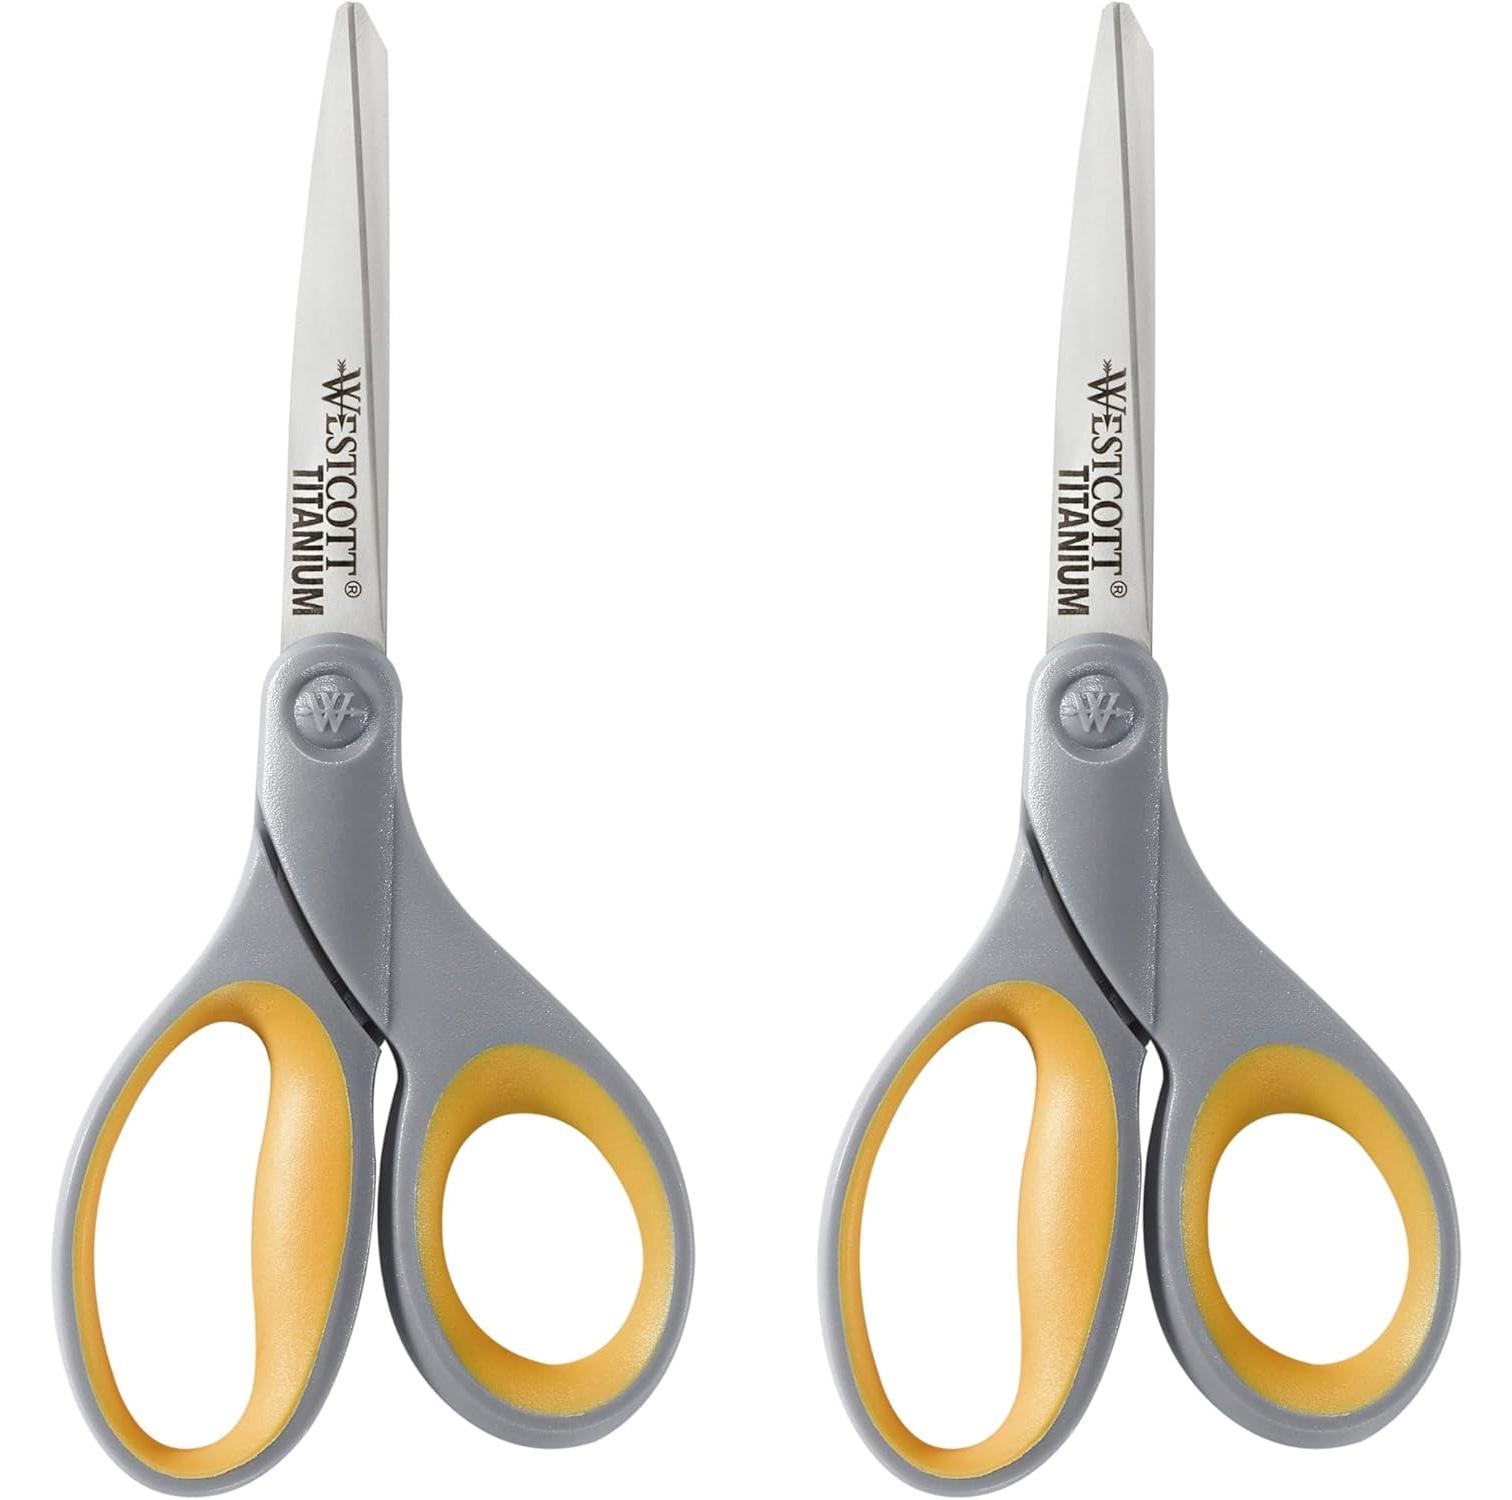 Westcott 13901 8-Inch Titanium Scissors For Office and Home 2 Pack for $7